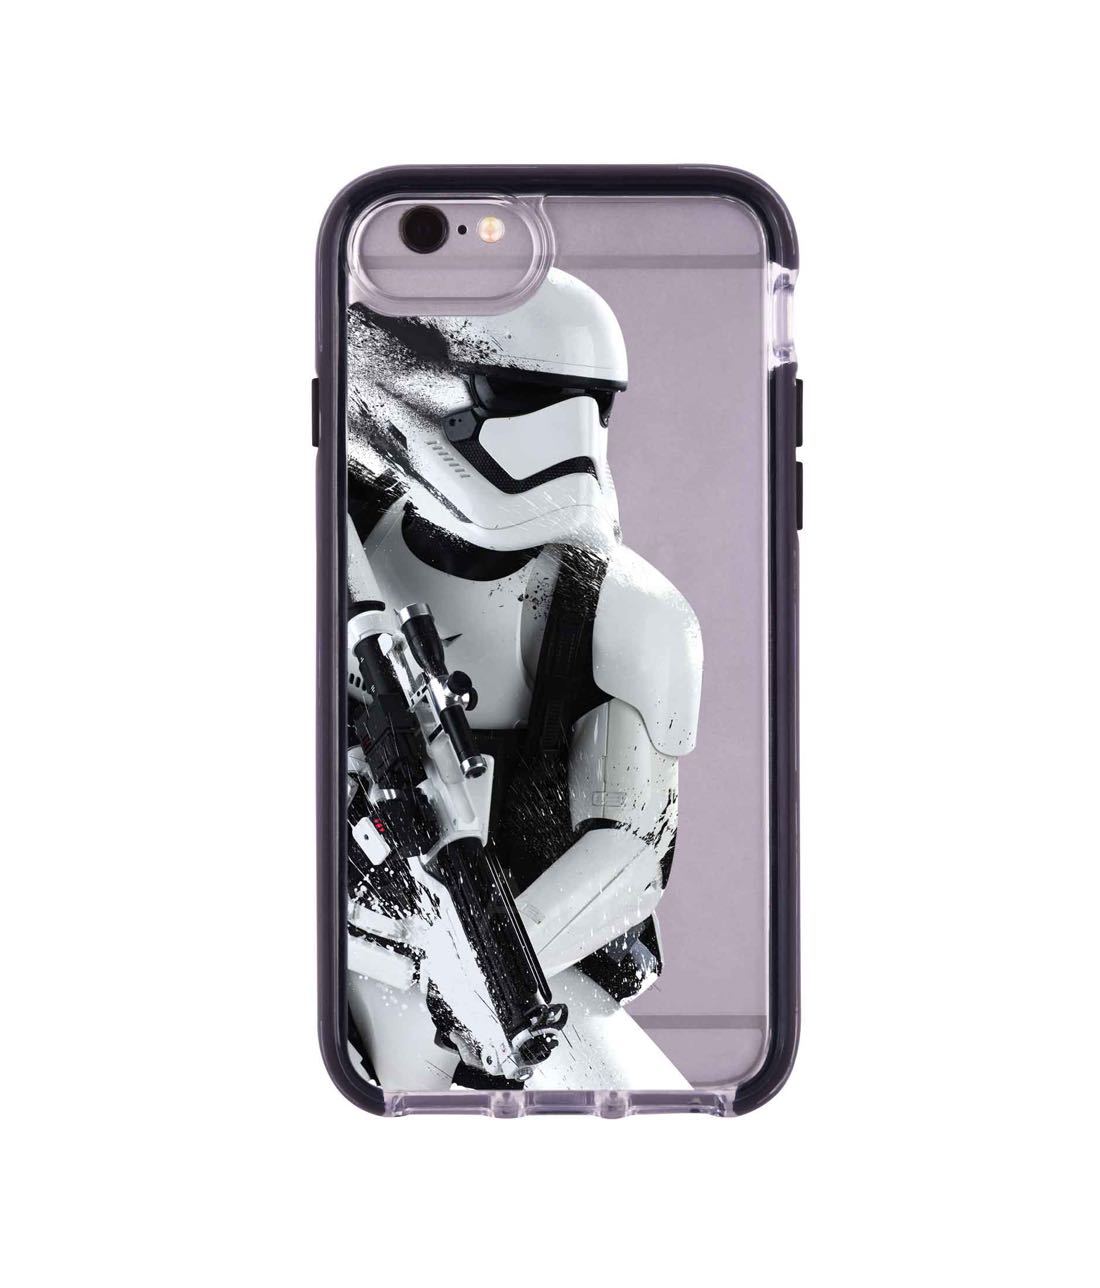 Trooper Storm - Extreme Phone Case for iPhone 6S